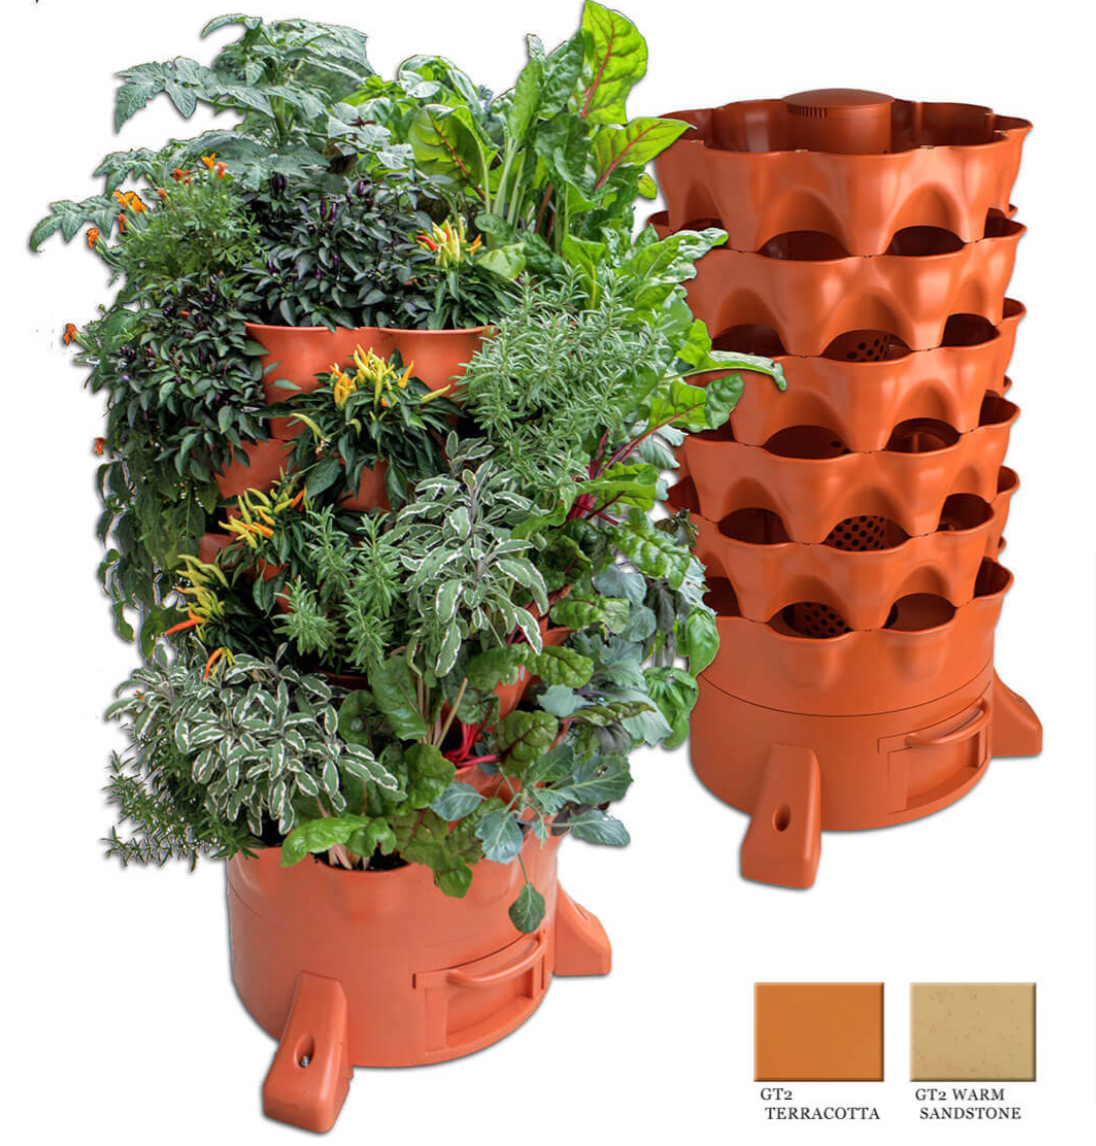 Garden Tower Project 2 Composting Vertical Garden Planter by Garden Tower Project - Lotus and Willow